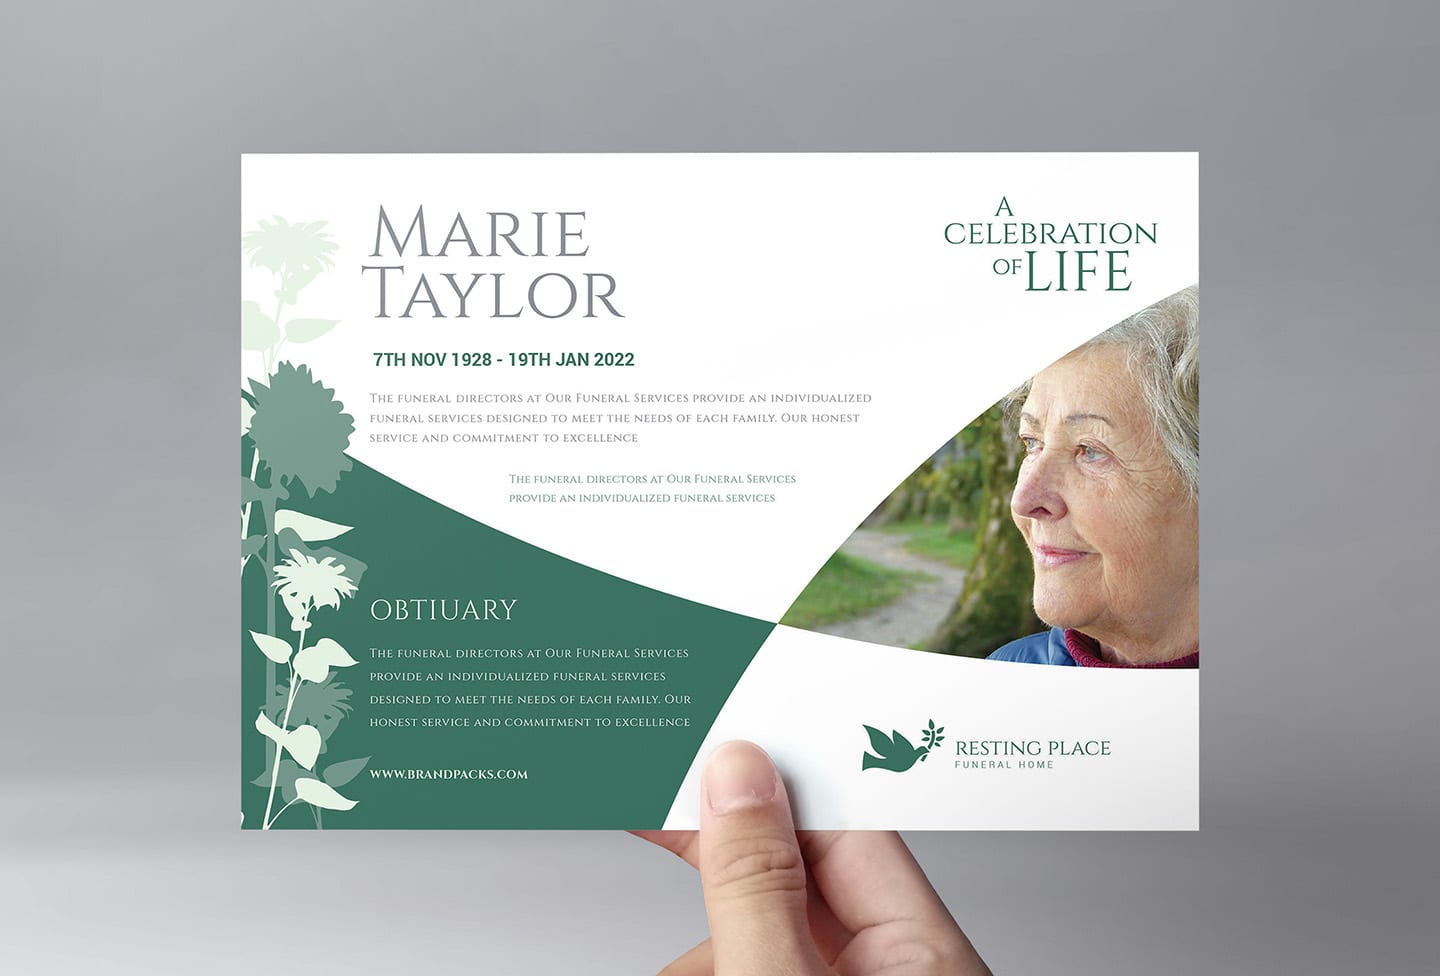 Service Flyer Template Free